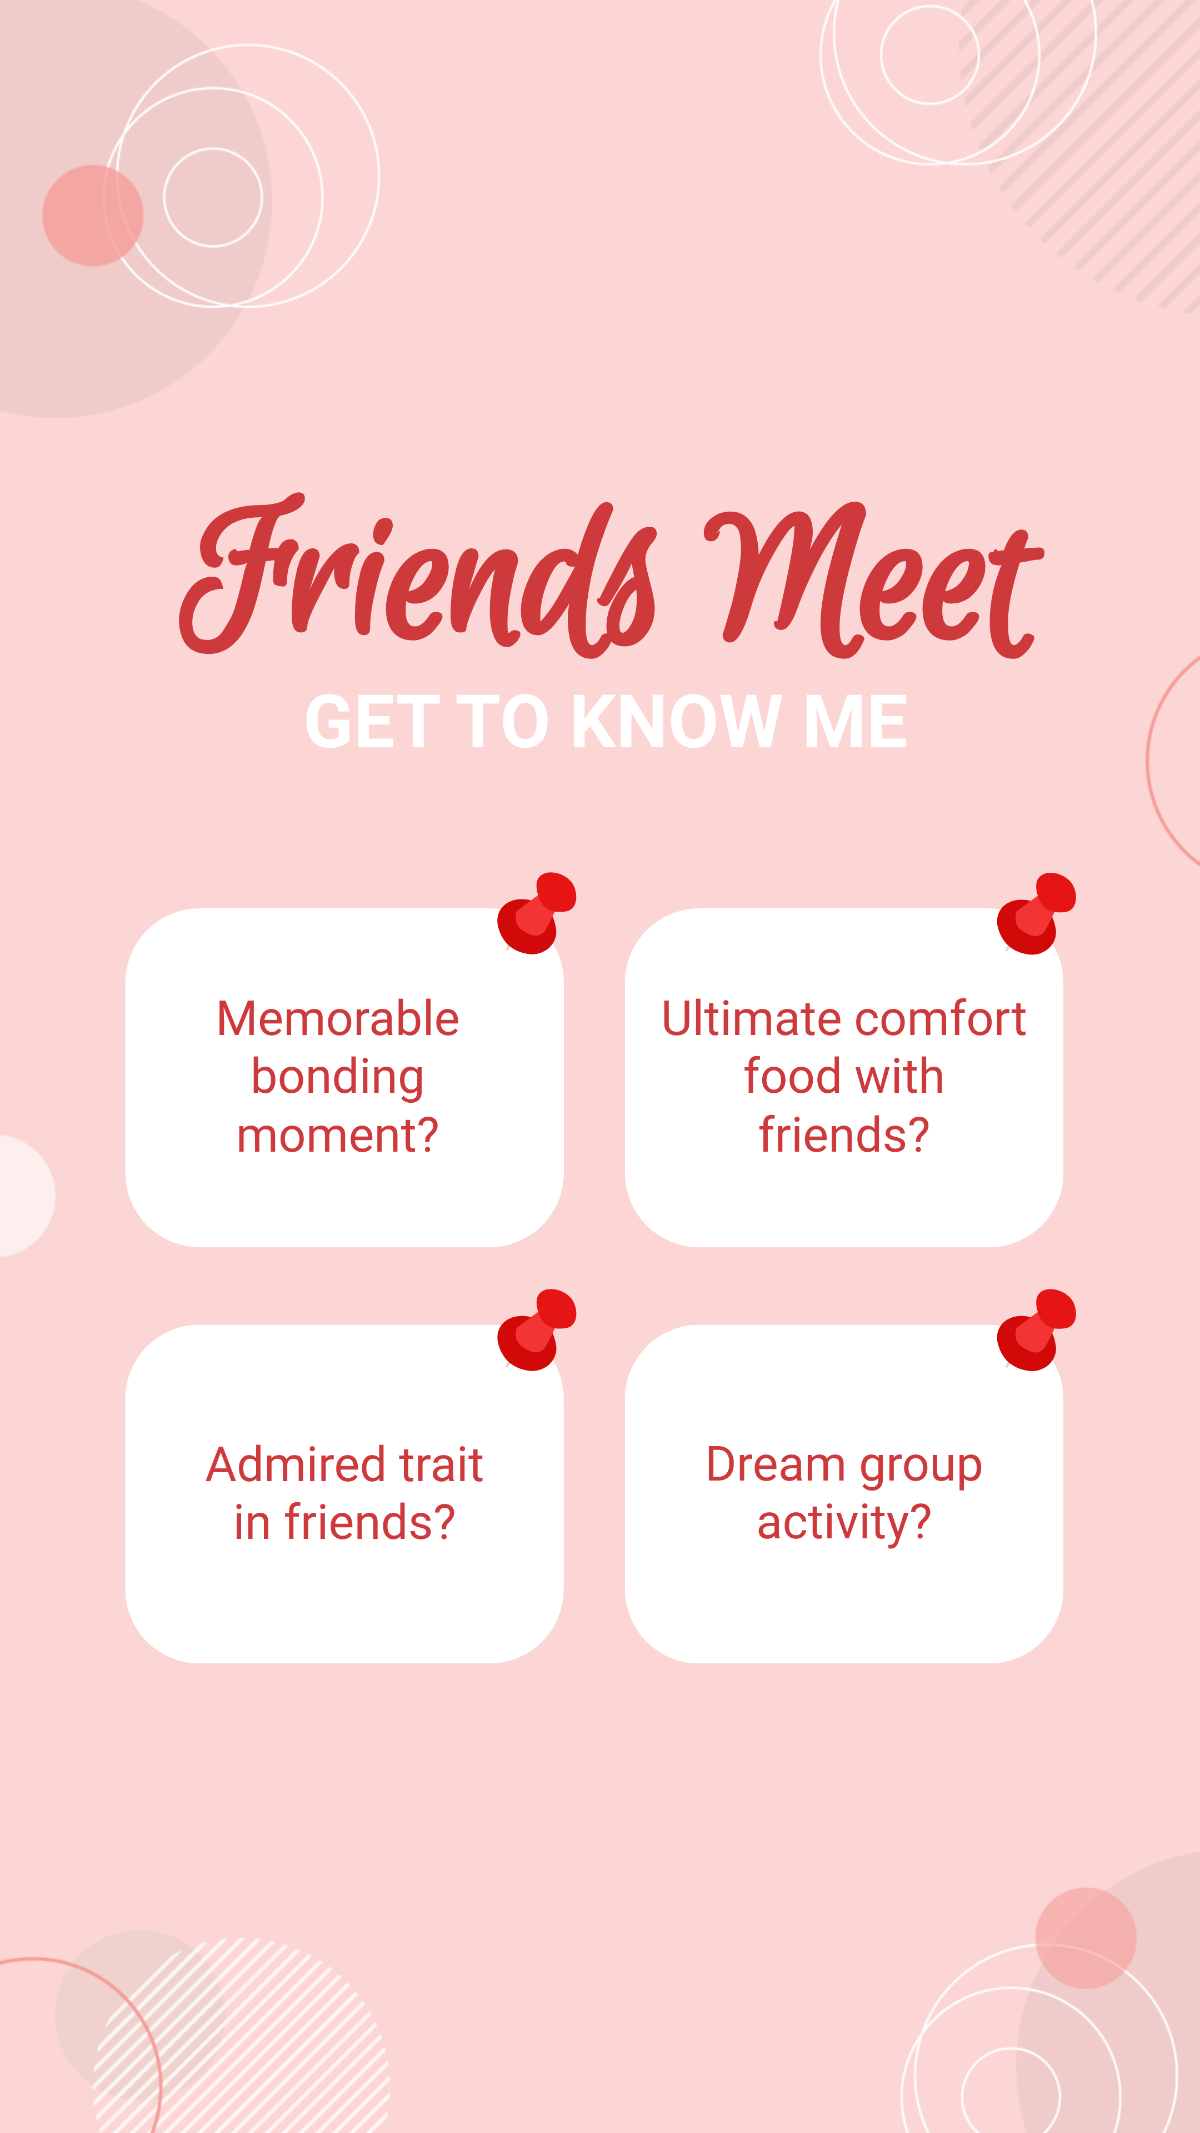 Get to Know Me Friendship Meet Instagram Post Template